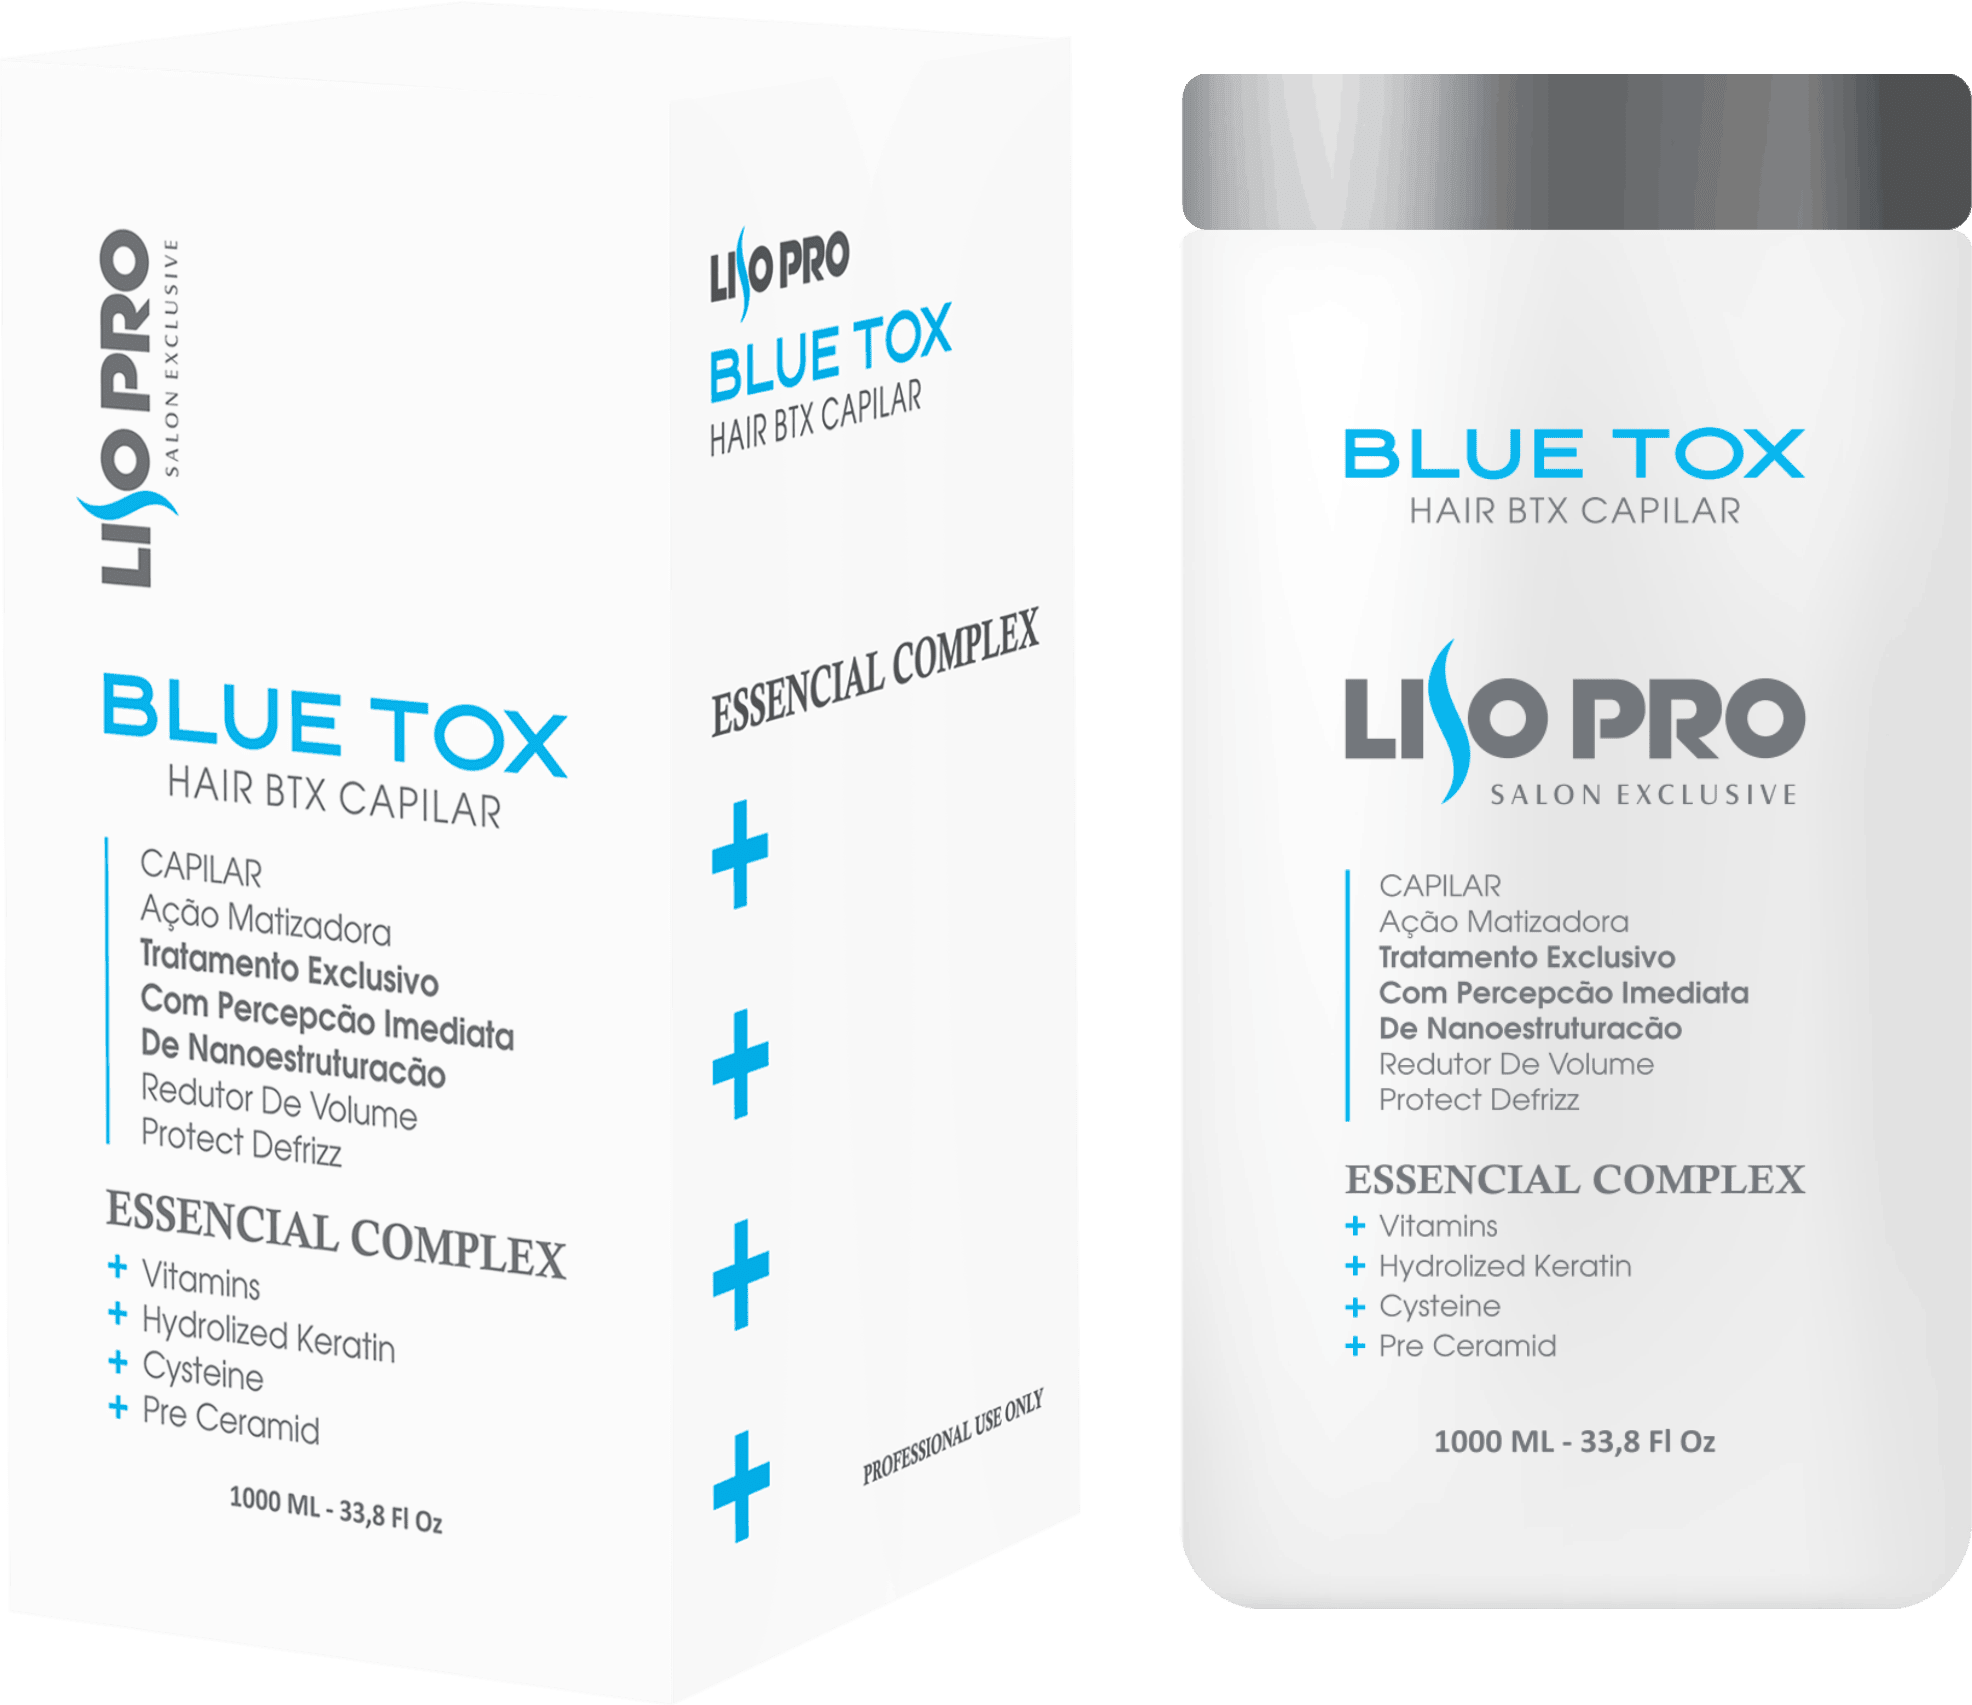 LISO PRO / BLUE TOX